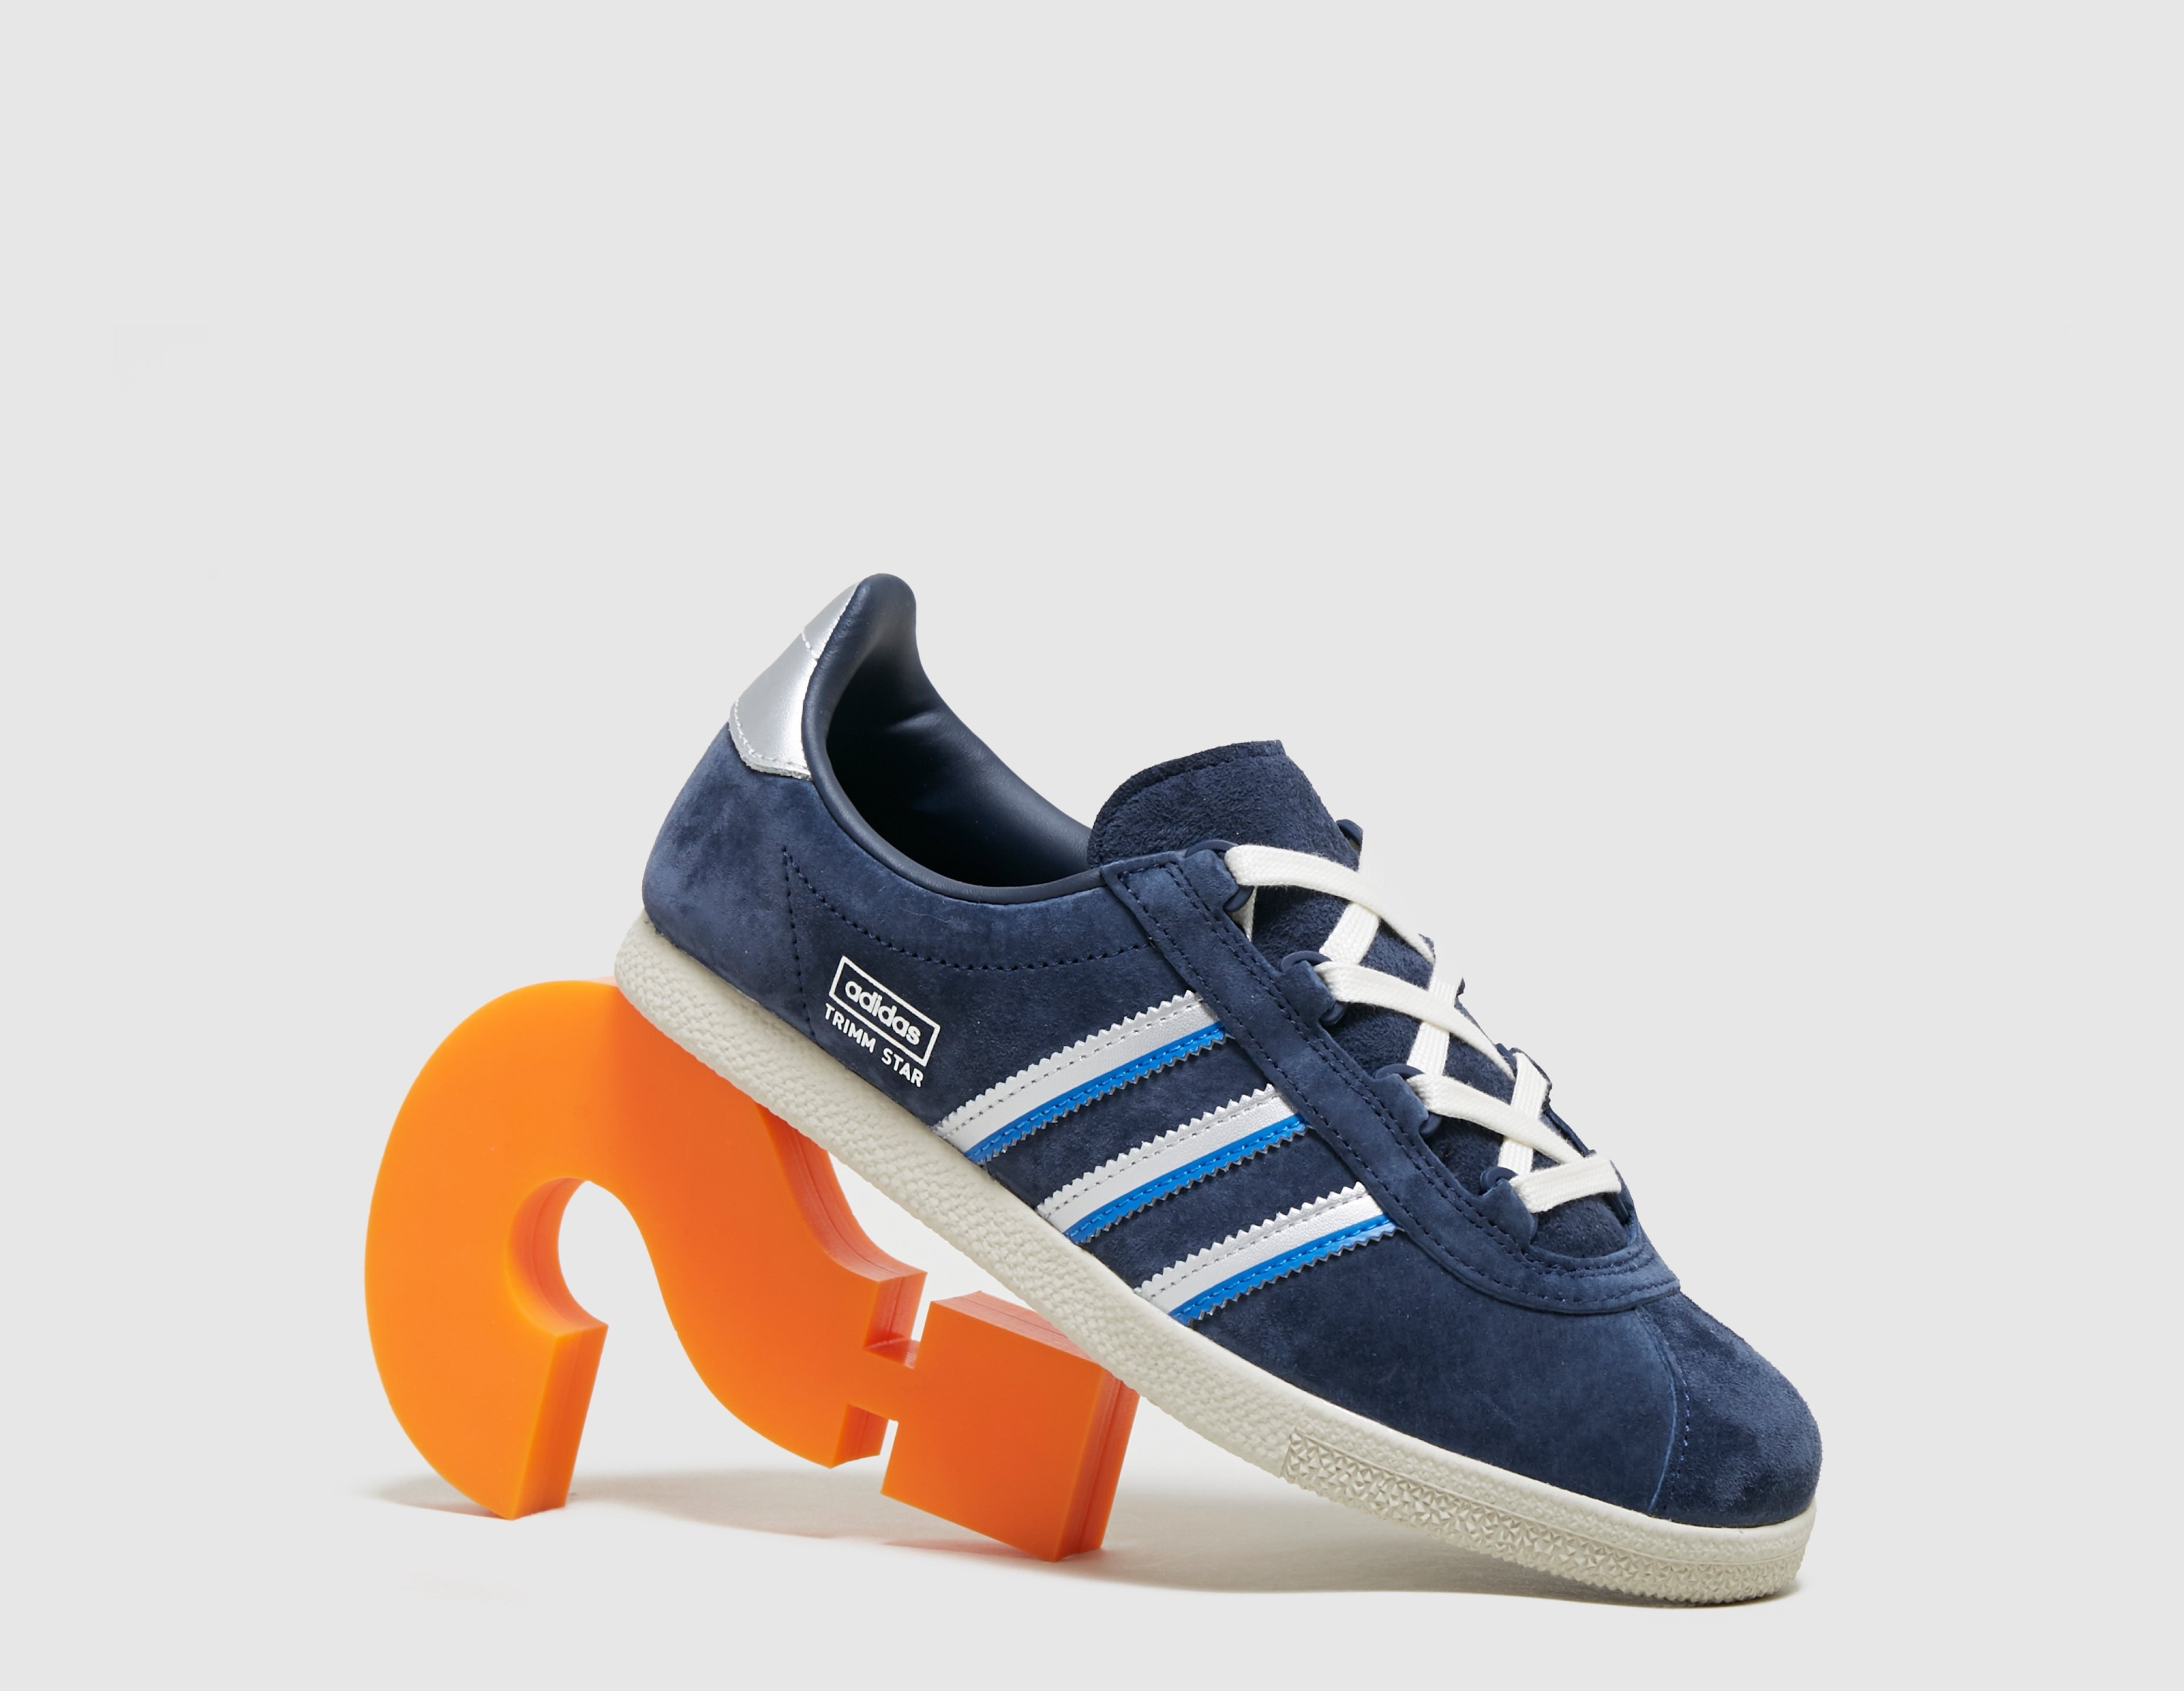 Adidas marquee boost mens white basketball sneakers shoes g26212 - Blue adidas Originals 'The Lost Ones - Stclaircomo? Exclusive Women's | Stclaircomo? Star